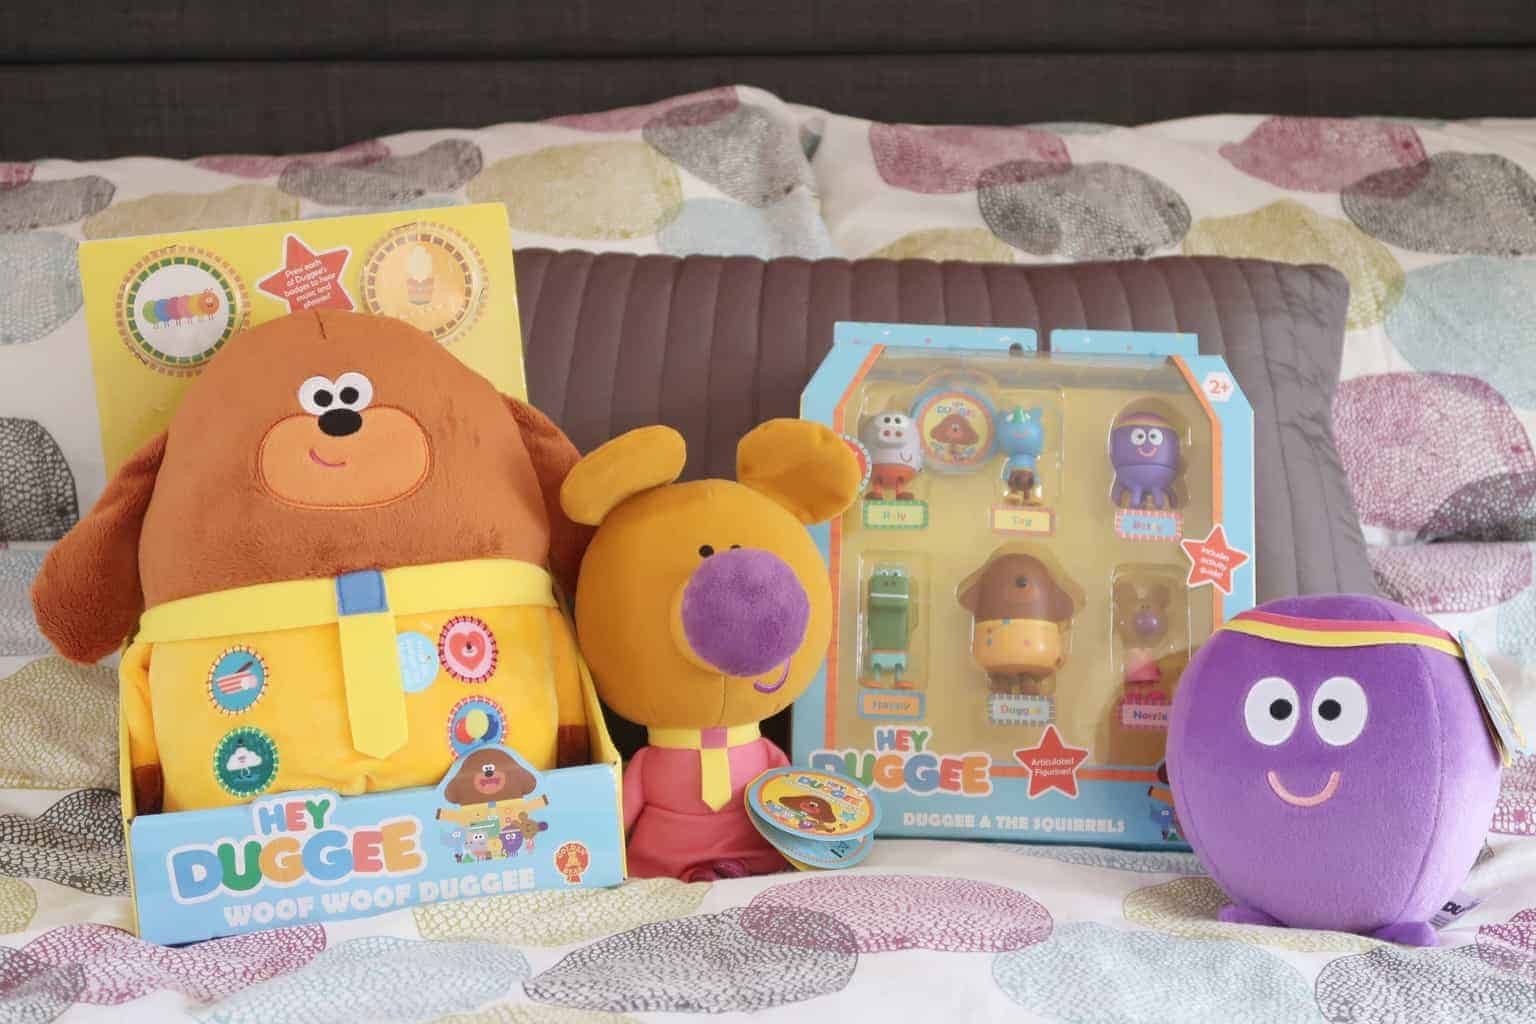 hey duggee norrie toy